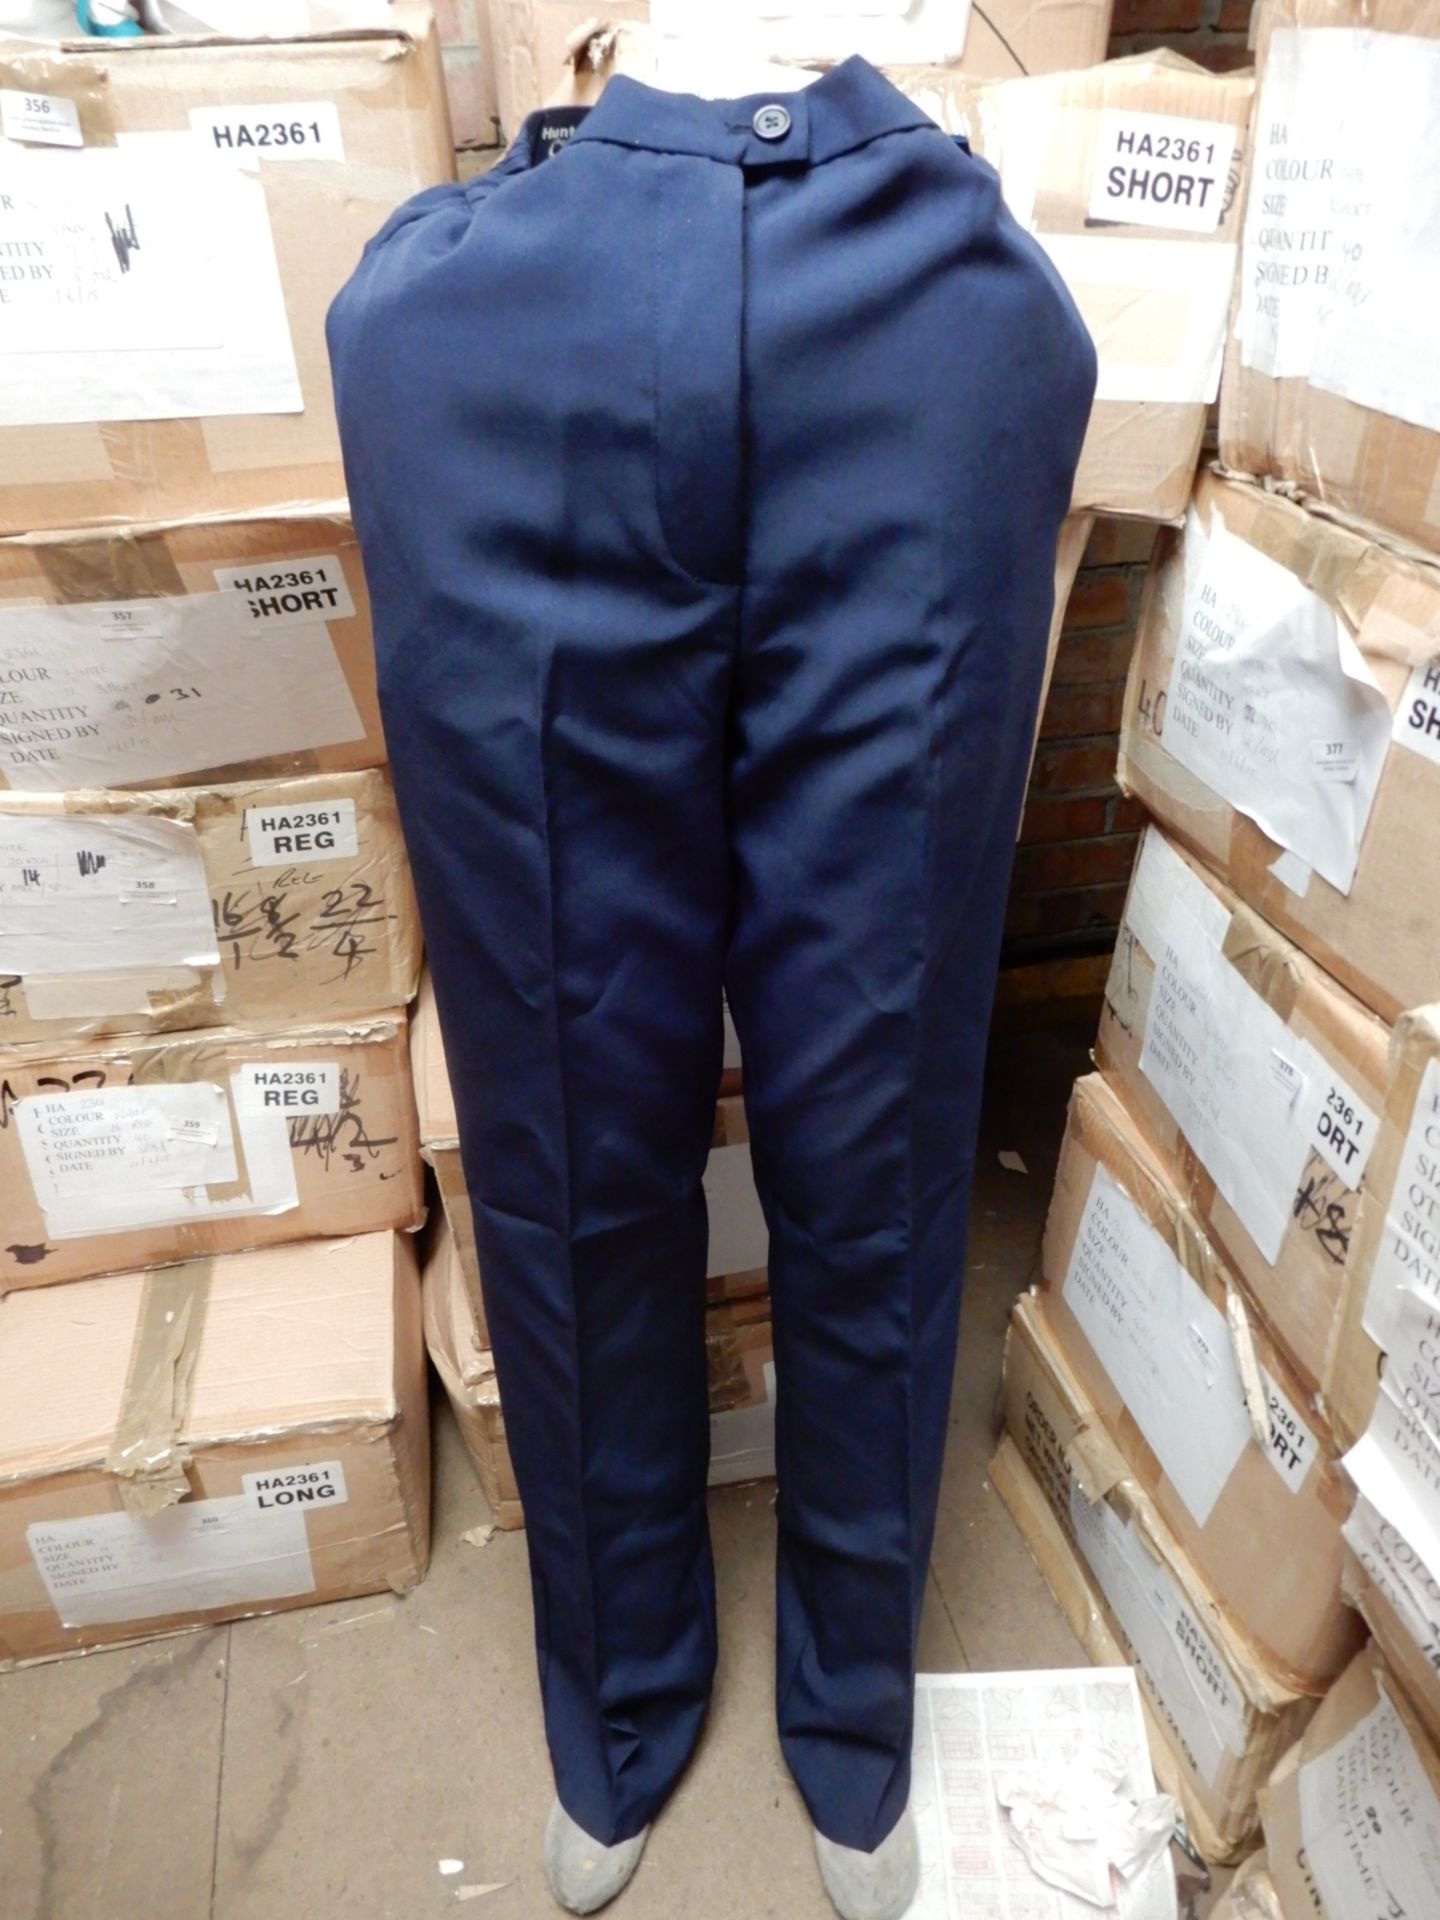 *Box Containing 20 HA1932 Trousers Size:12 Regular